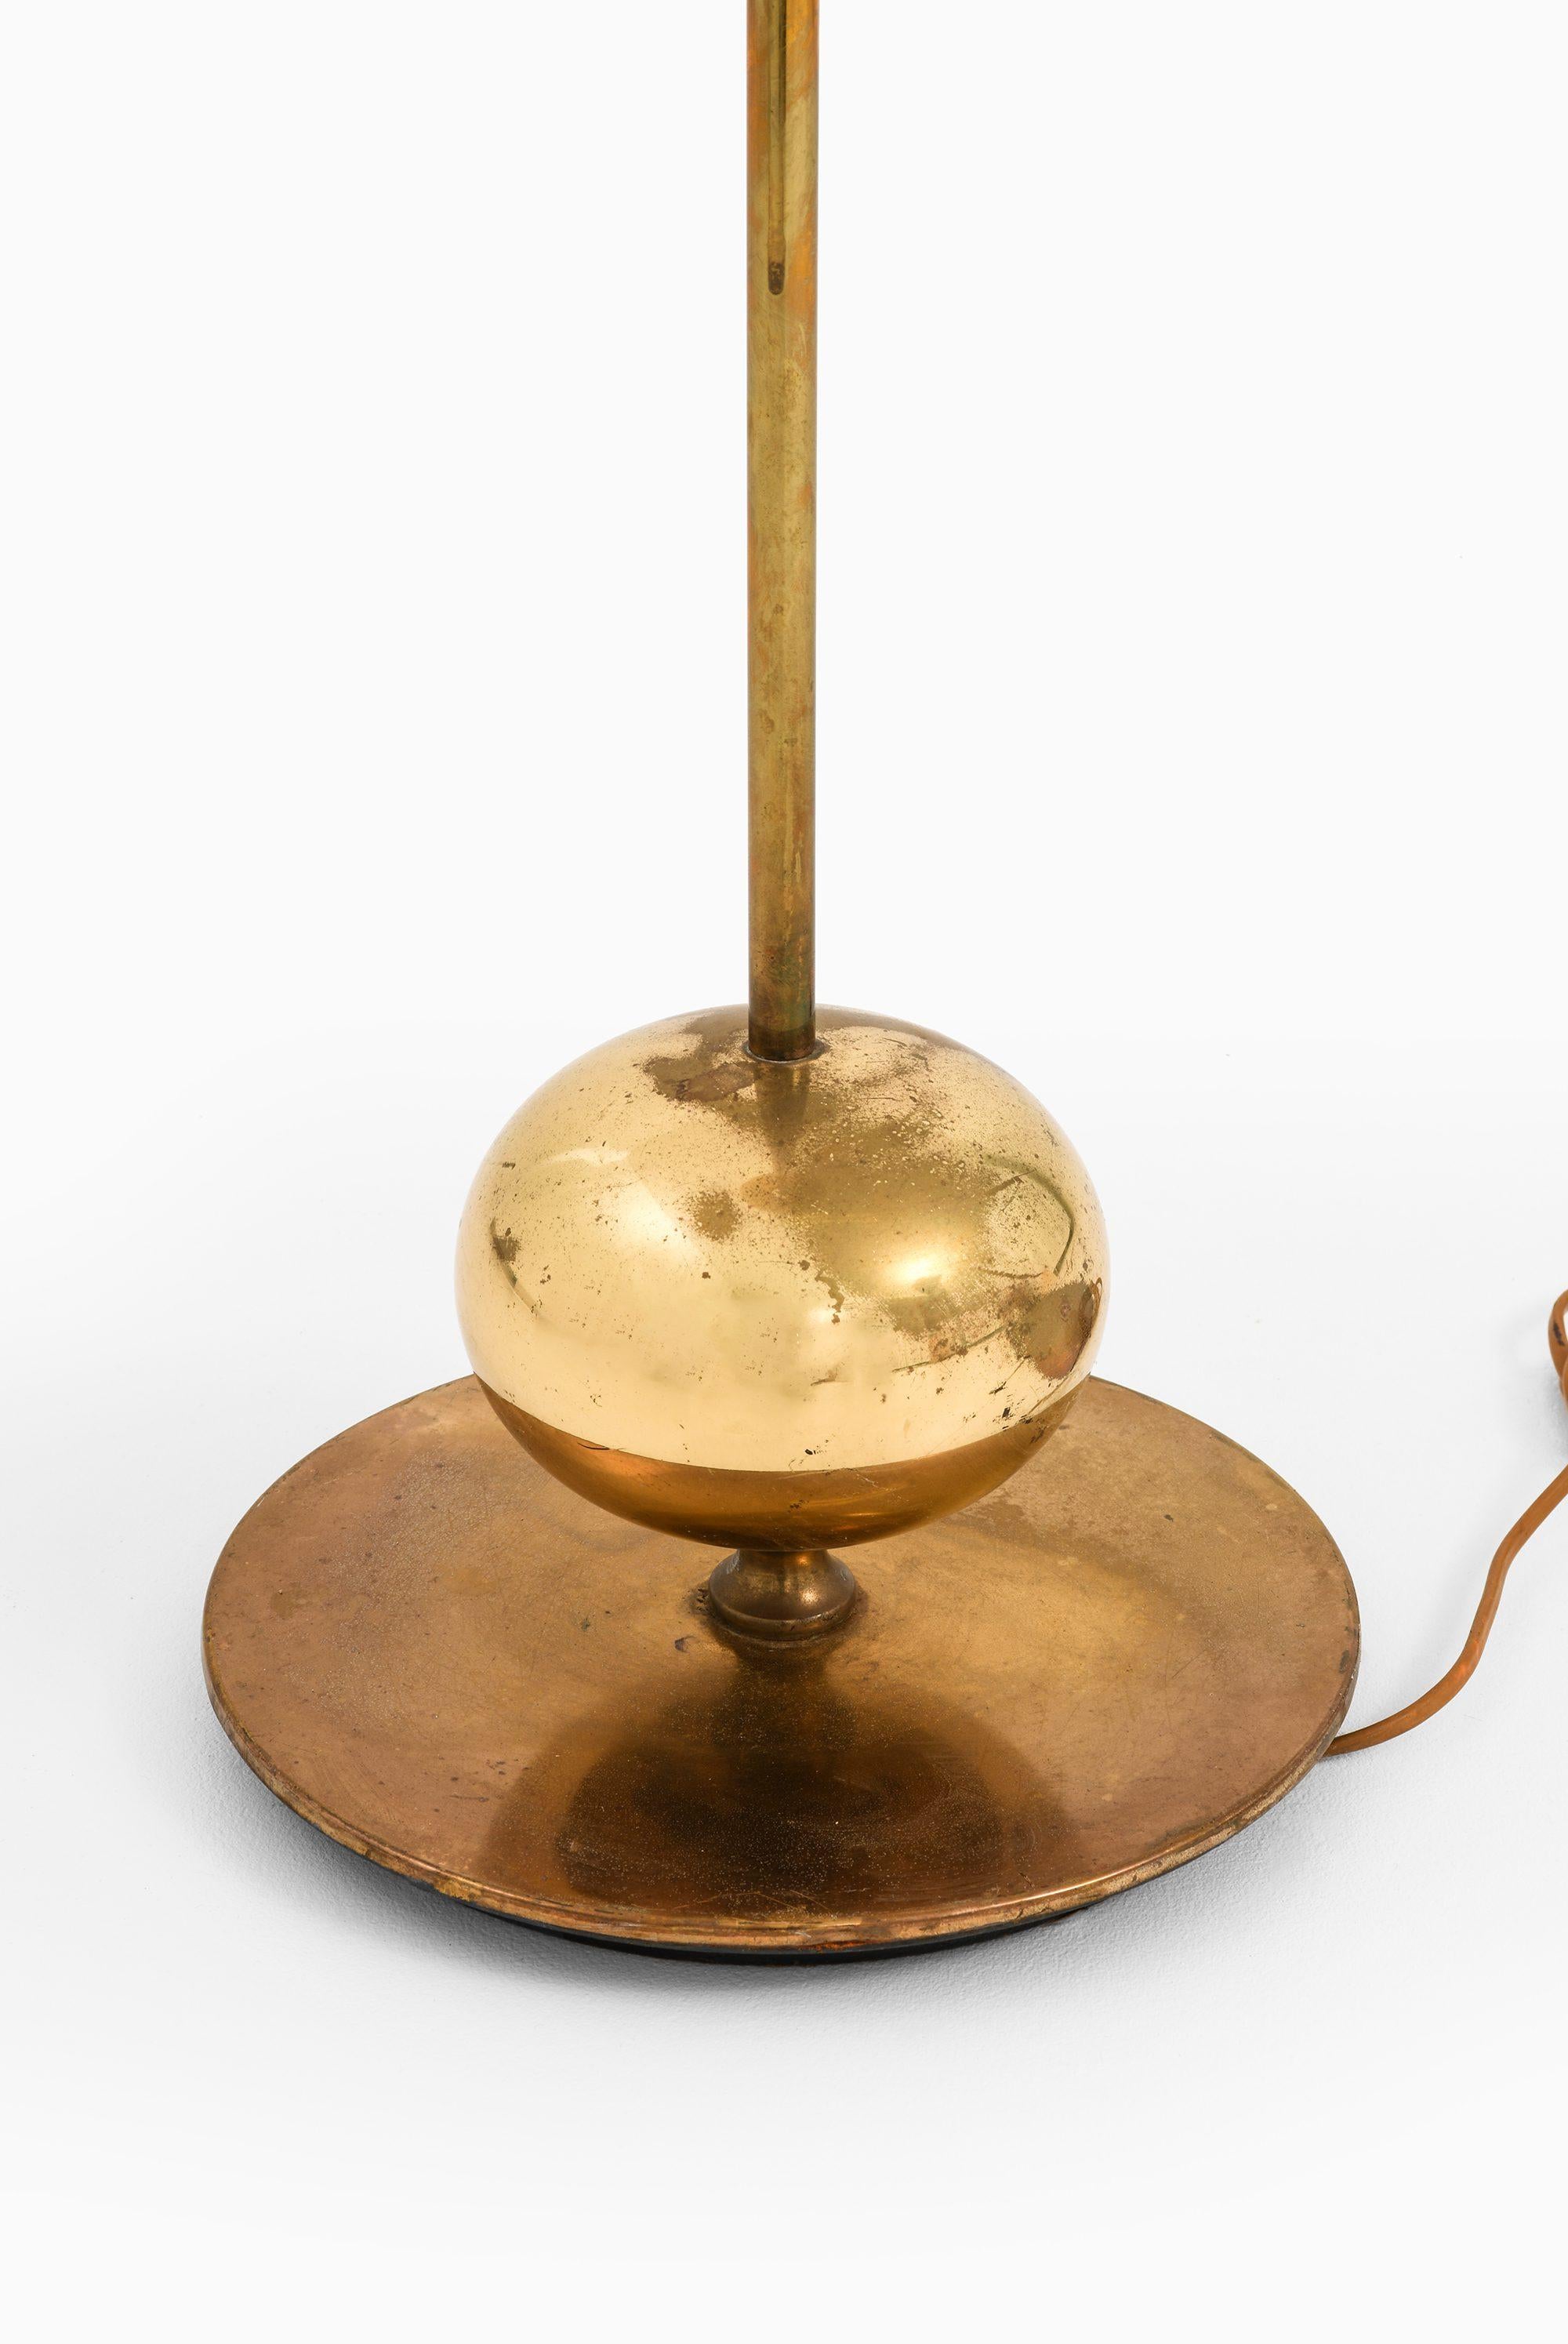 Swedish Rare Floor Lamp in Brass and Fabric Shade, 1950’s For Sale